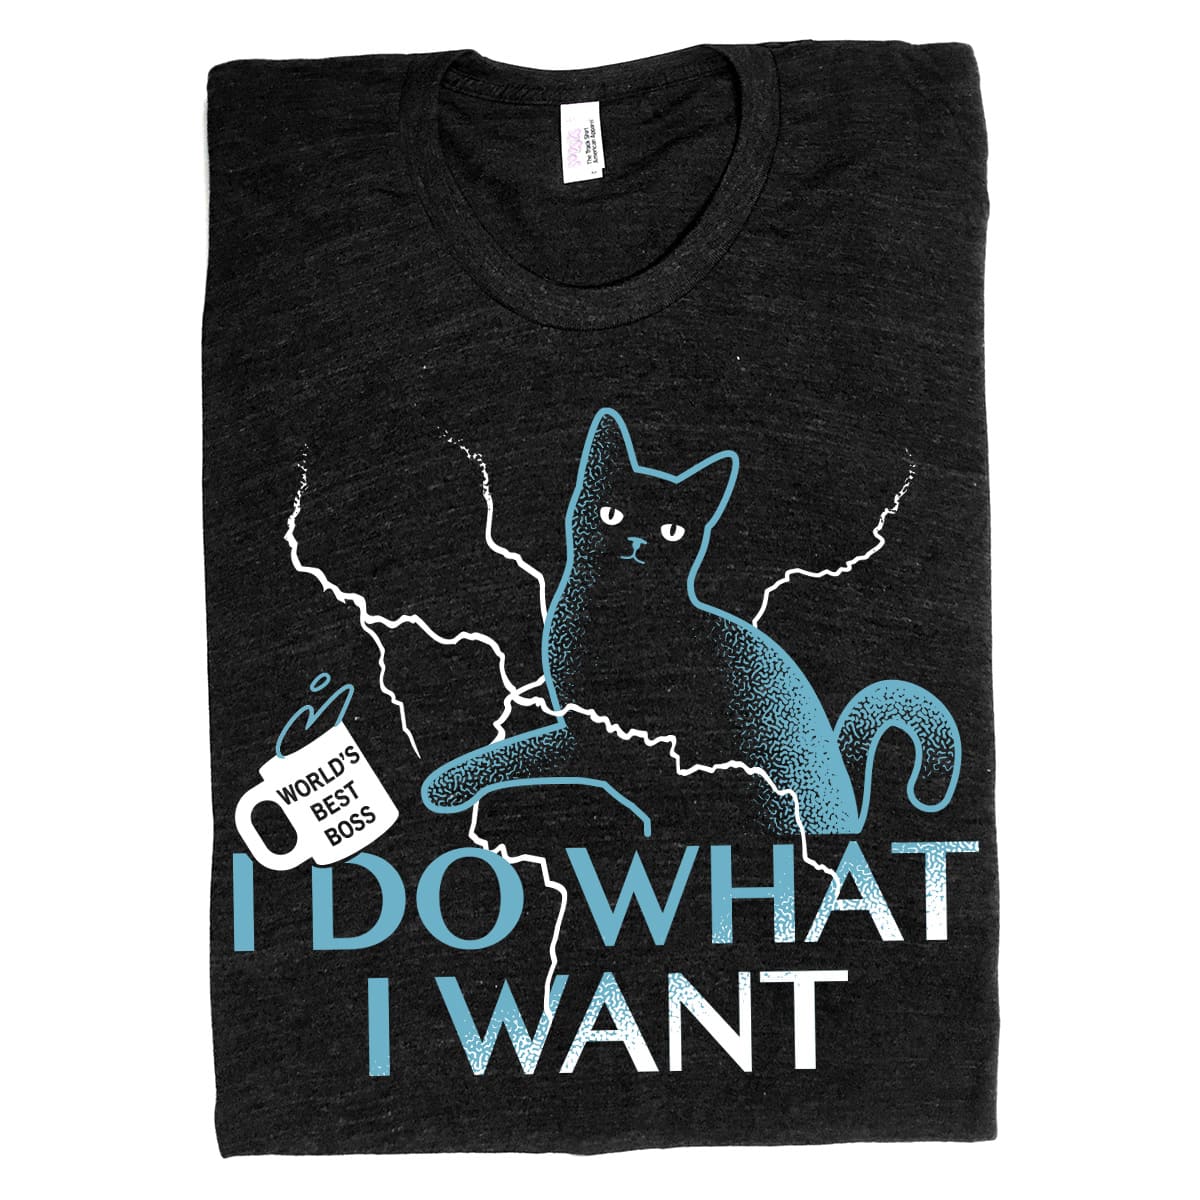 I do what I want - World's best boss, cat the boss, gift for cat person